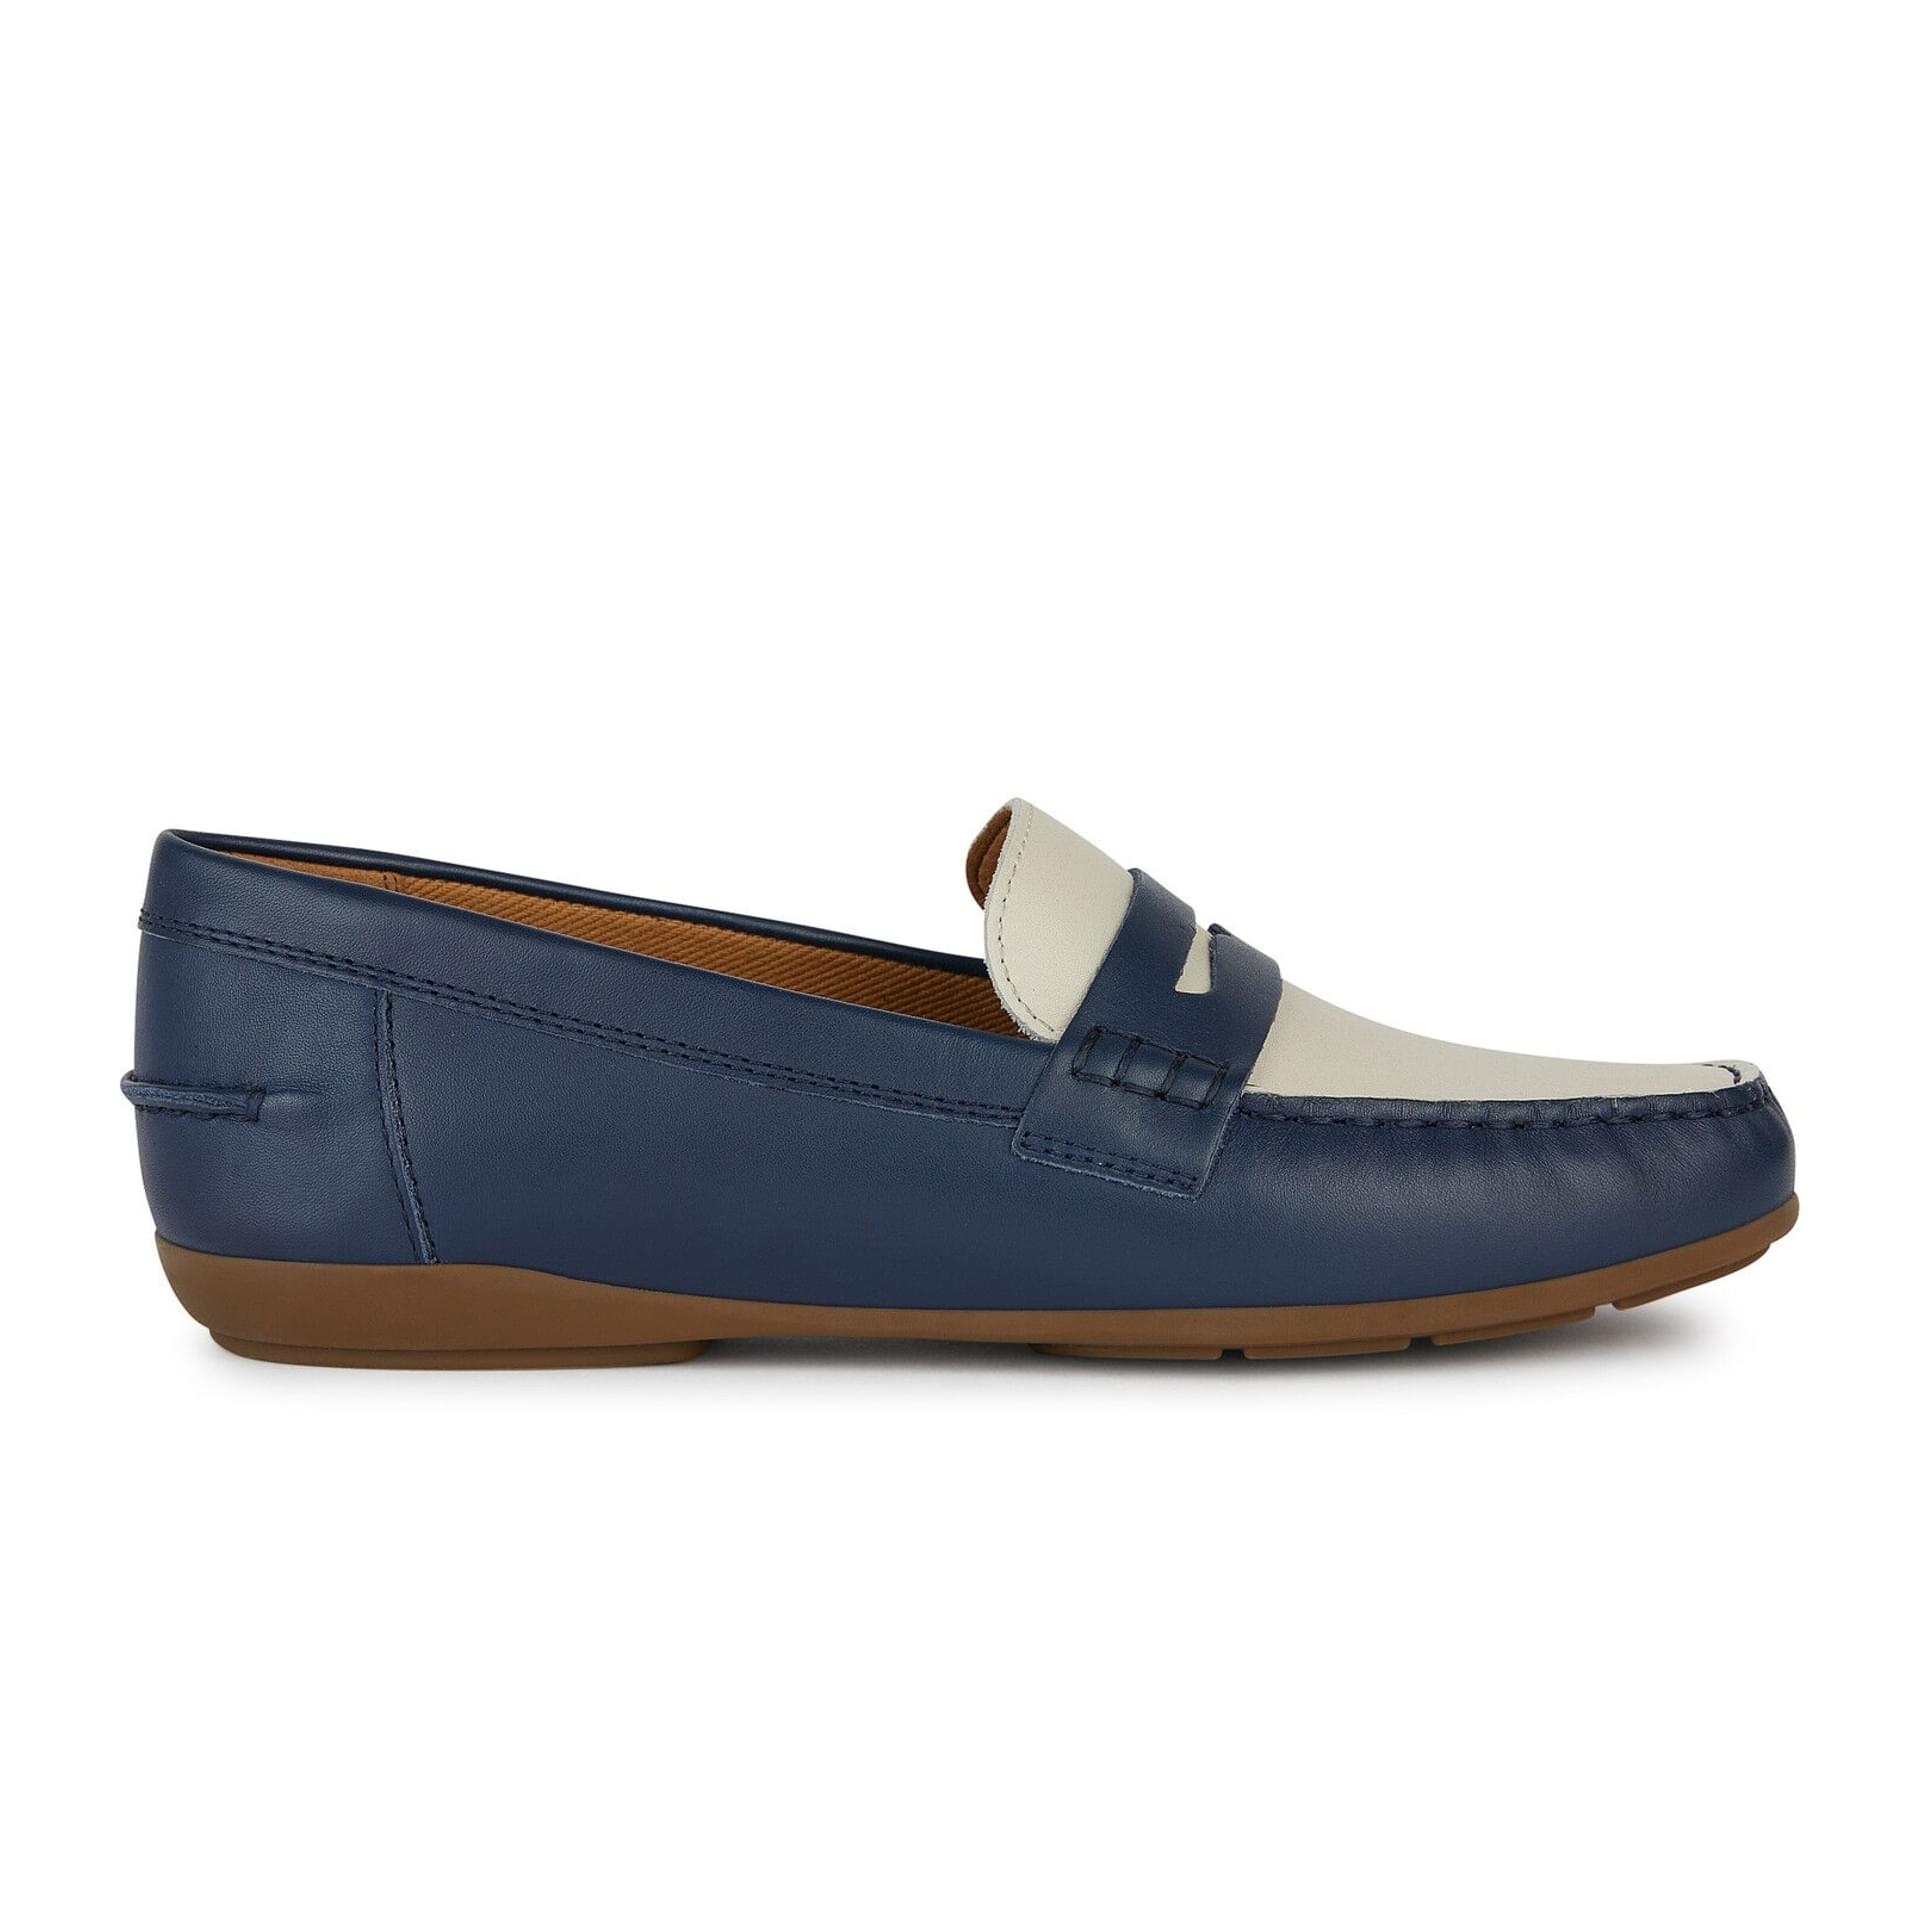 Geox Annytah Moc Moccassins D25BMA_00043 in Navy/Light Sand